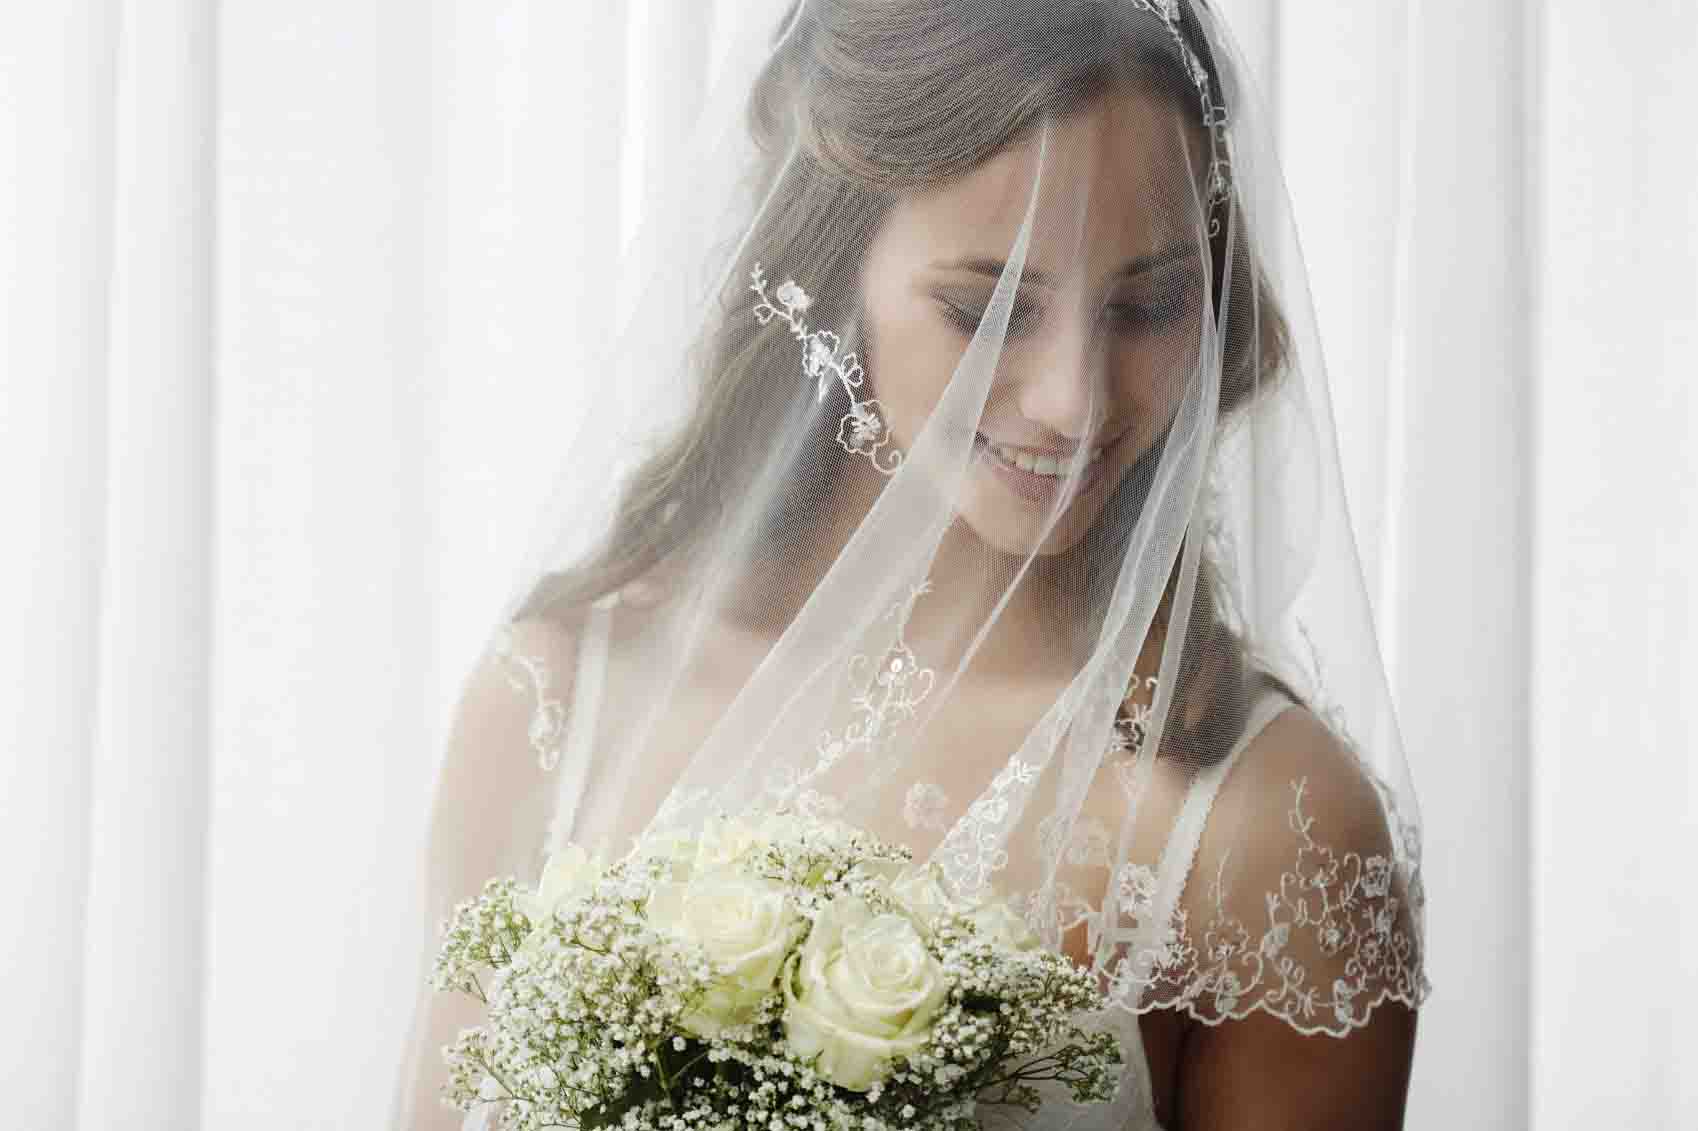 bride wearing veil on her wedding day tradition